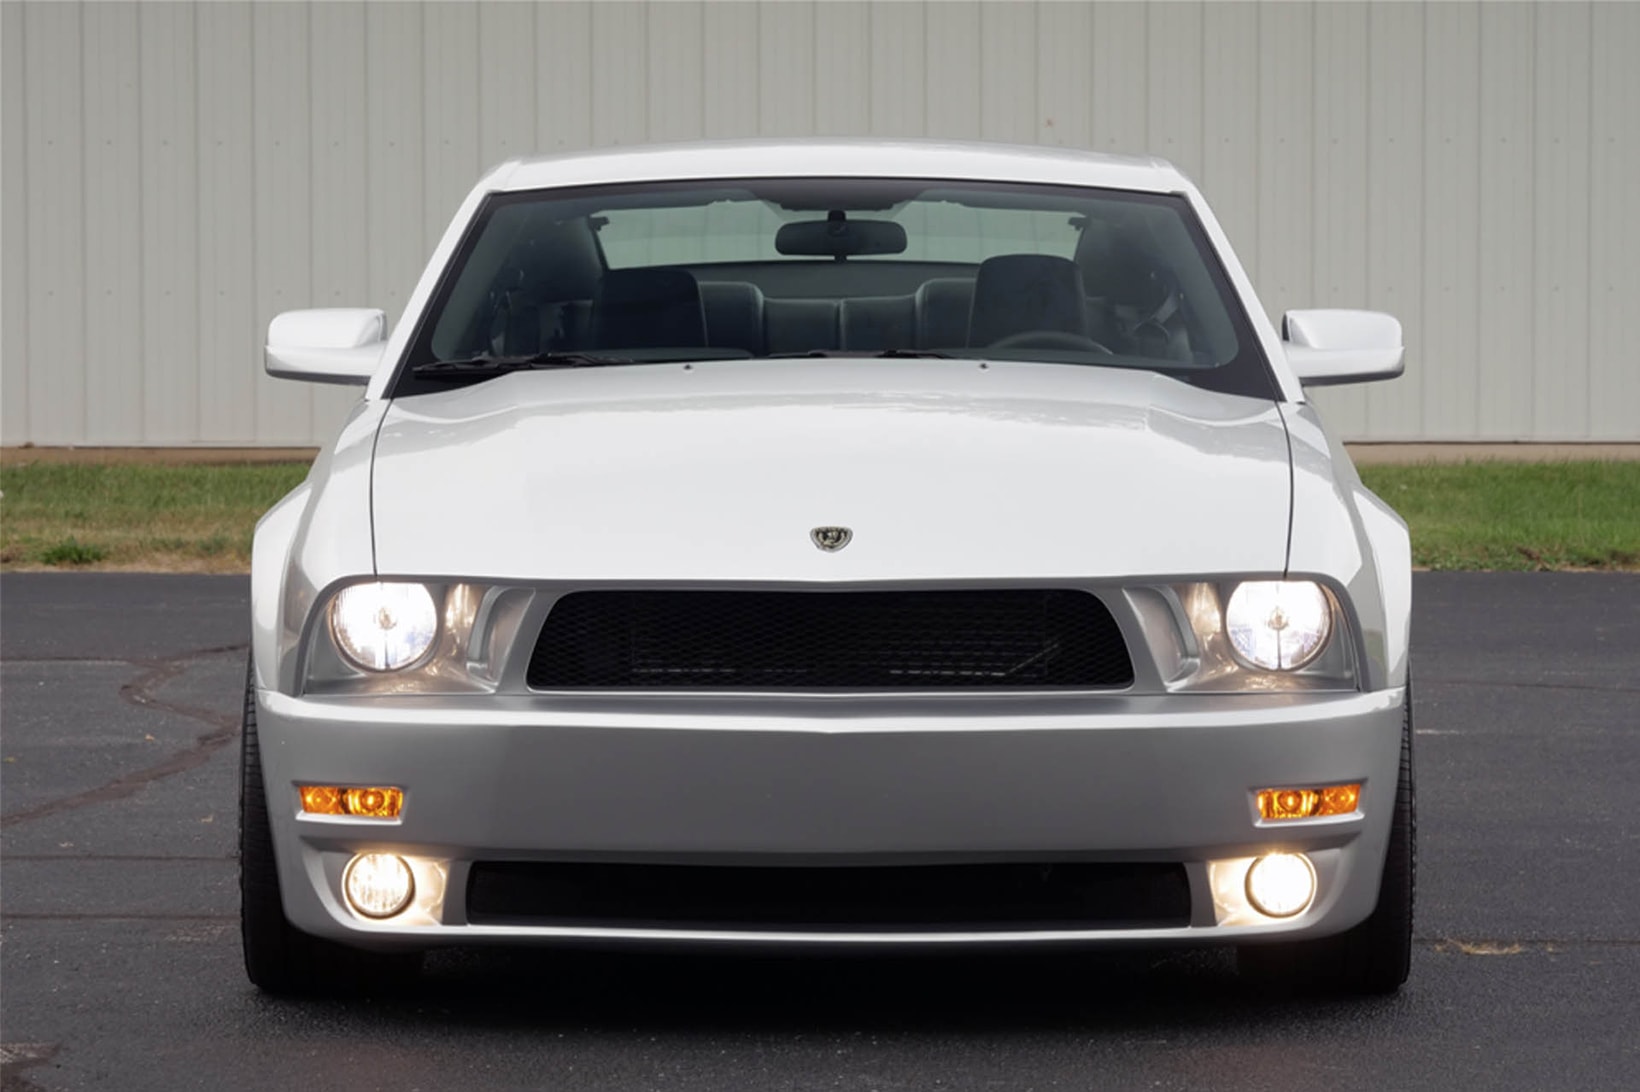 Ford Mustang Iacocca Silver Edition Auction 2009 45th anniversary car black grey